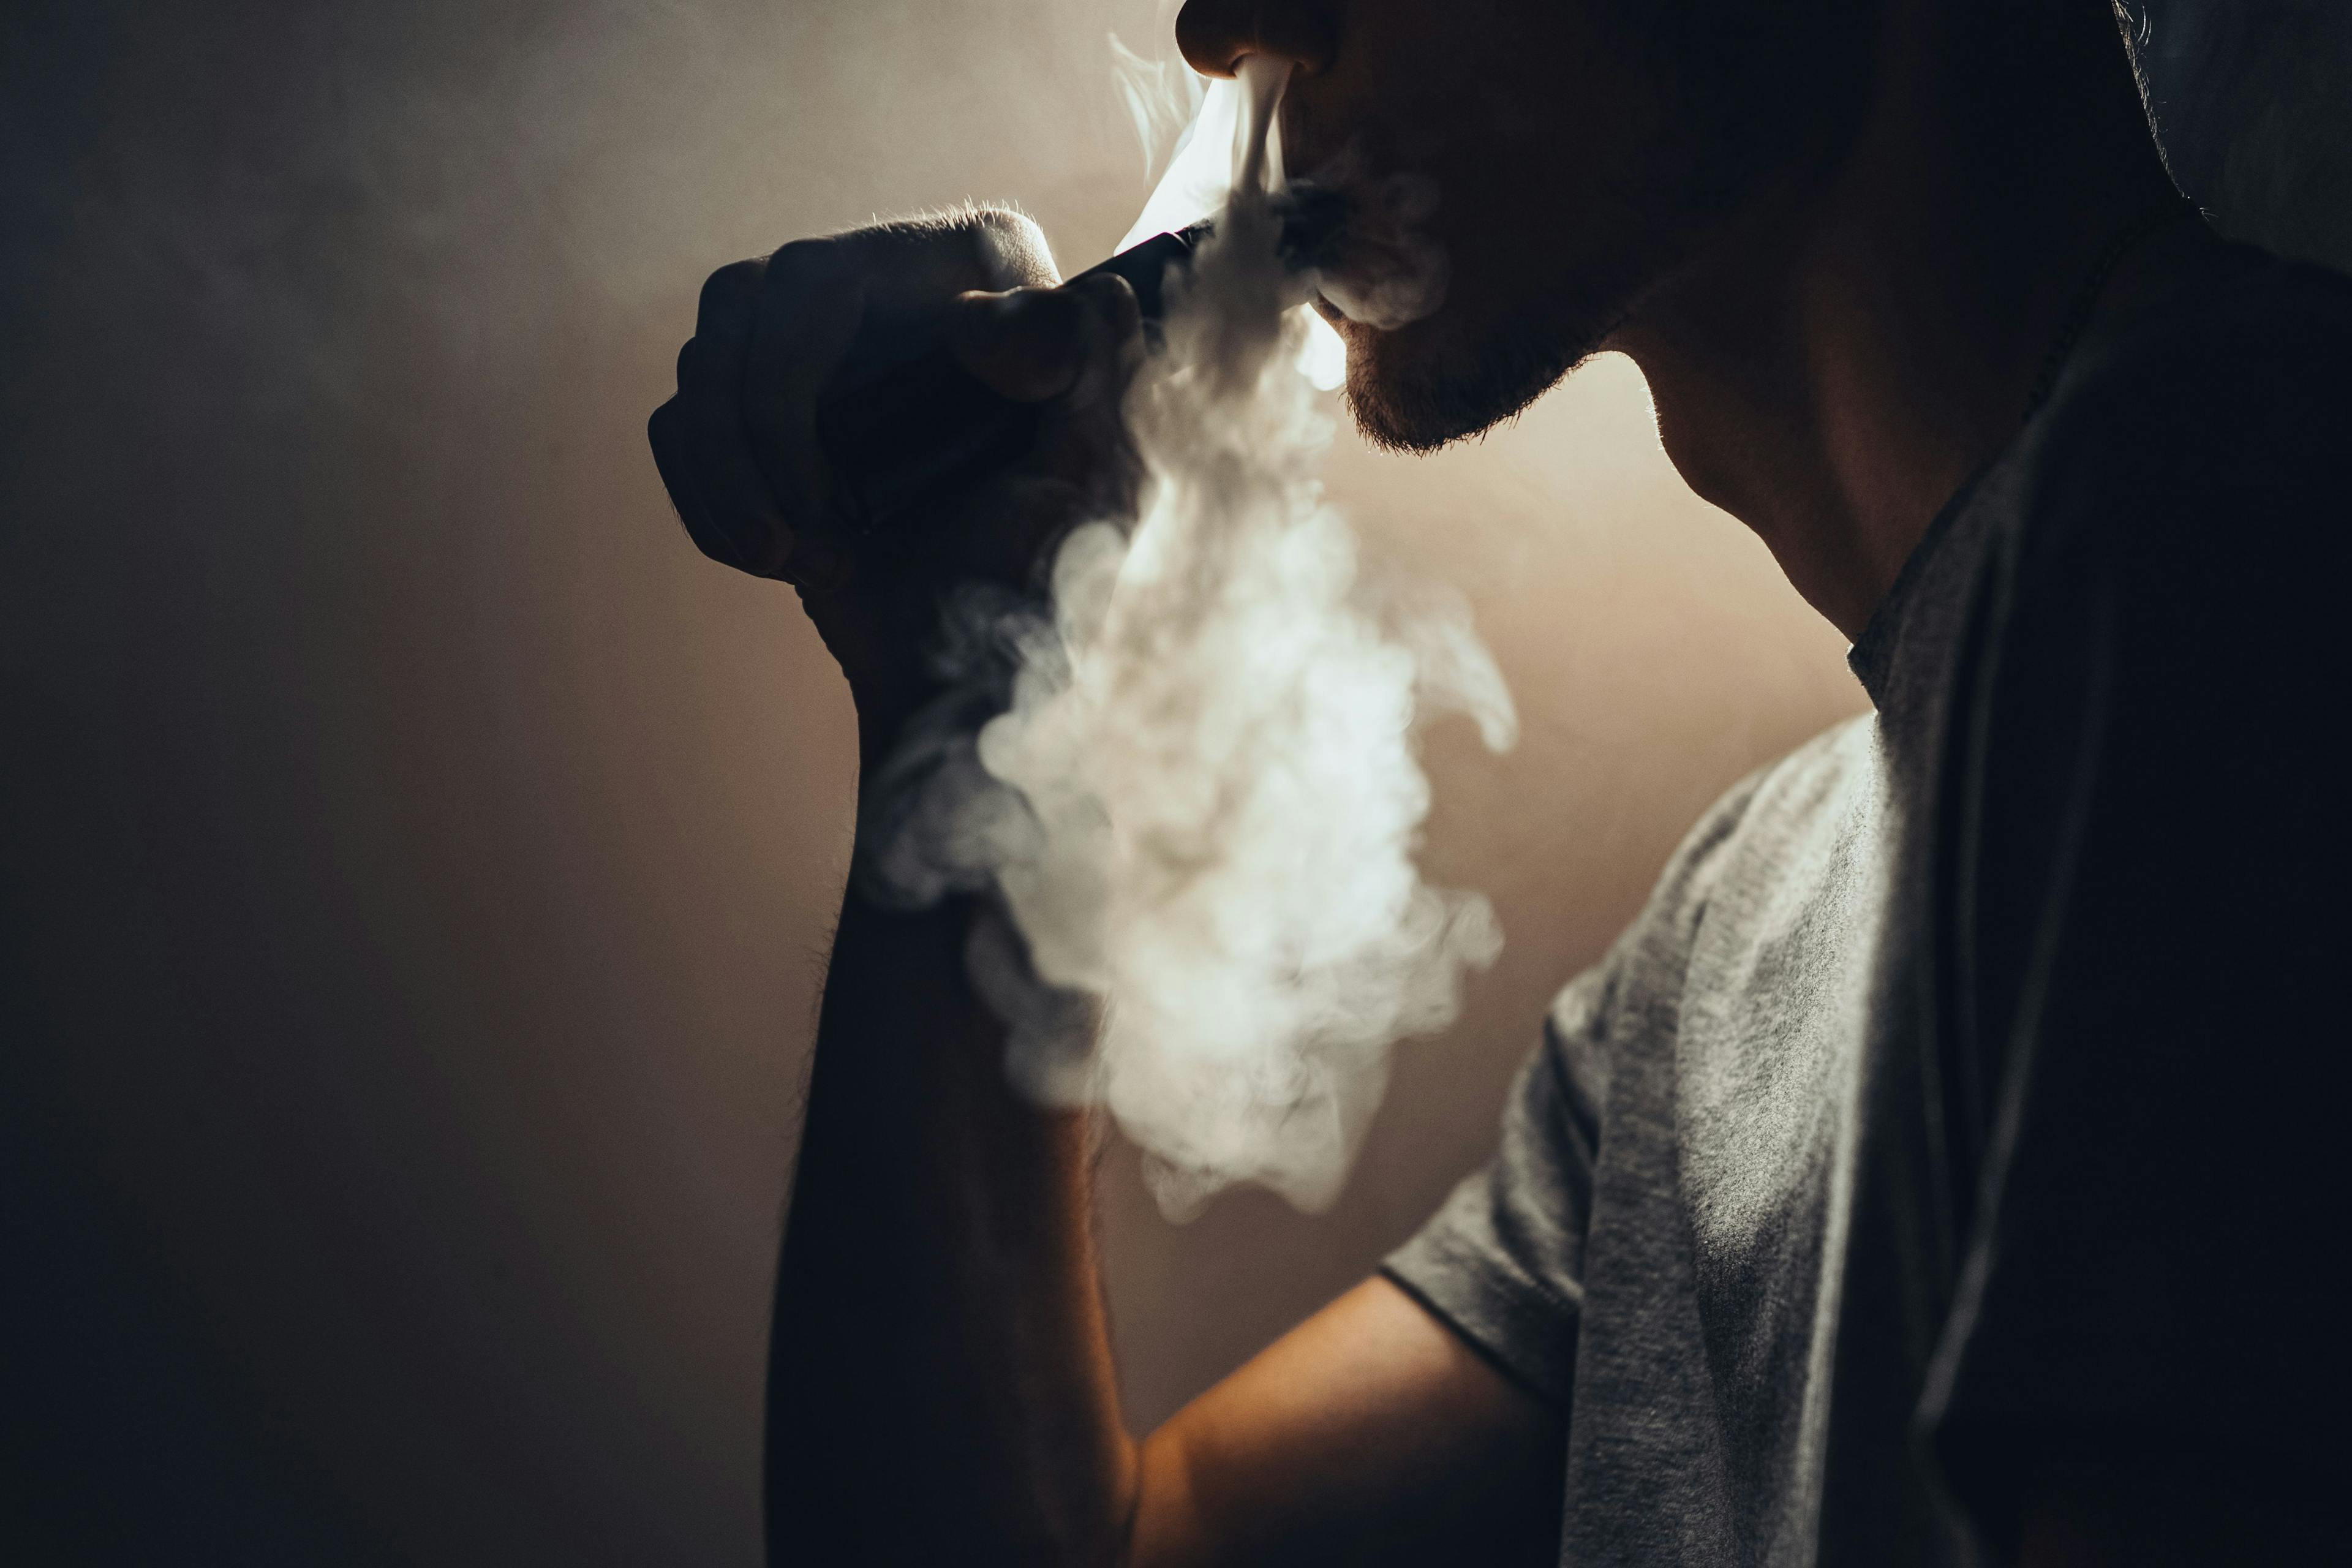 Vaping injuries raise risk of respiratory problems and other issues, study finds